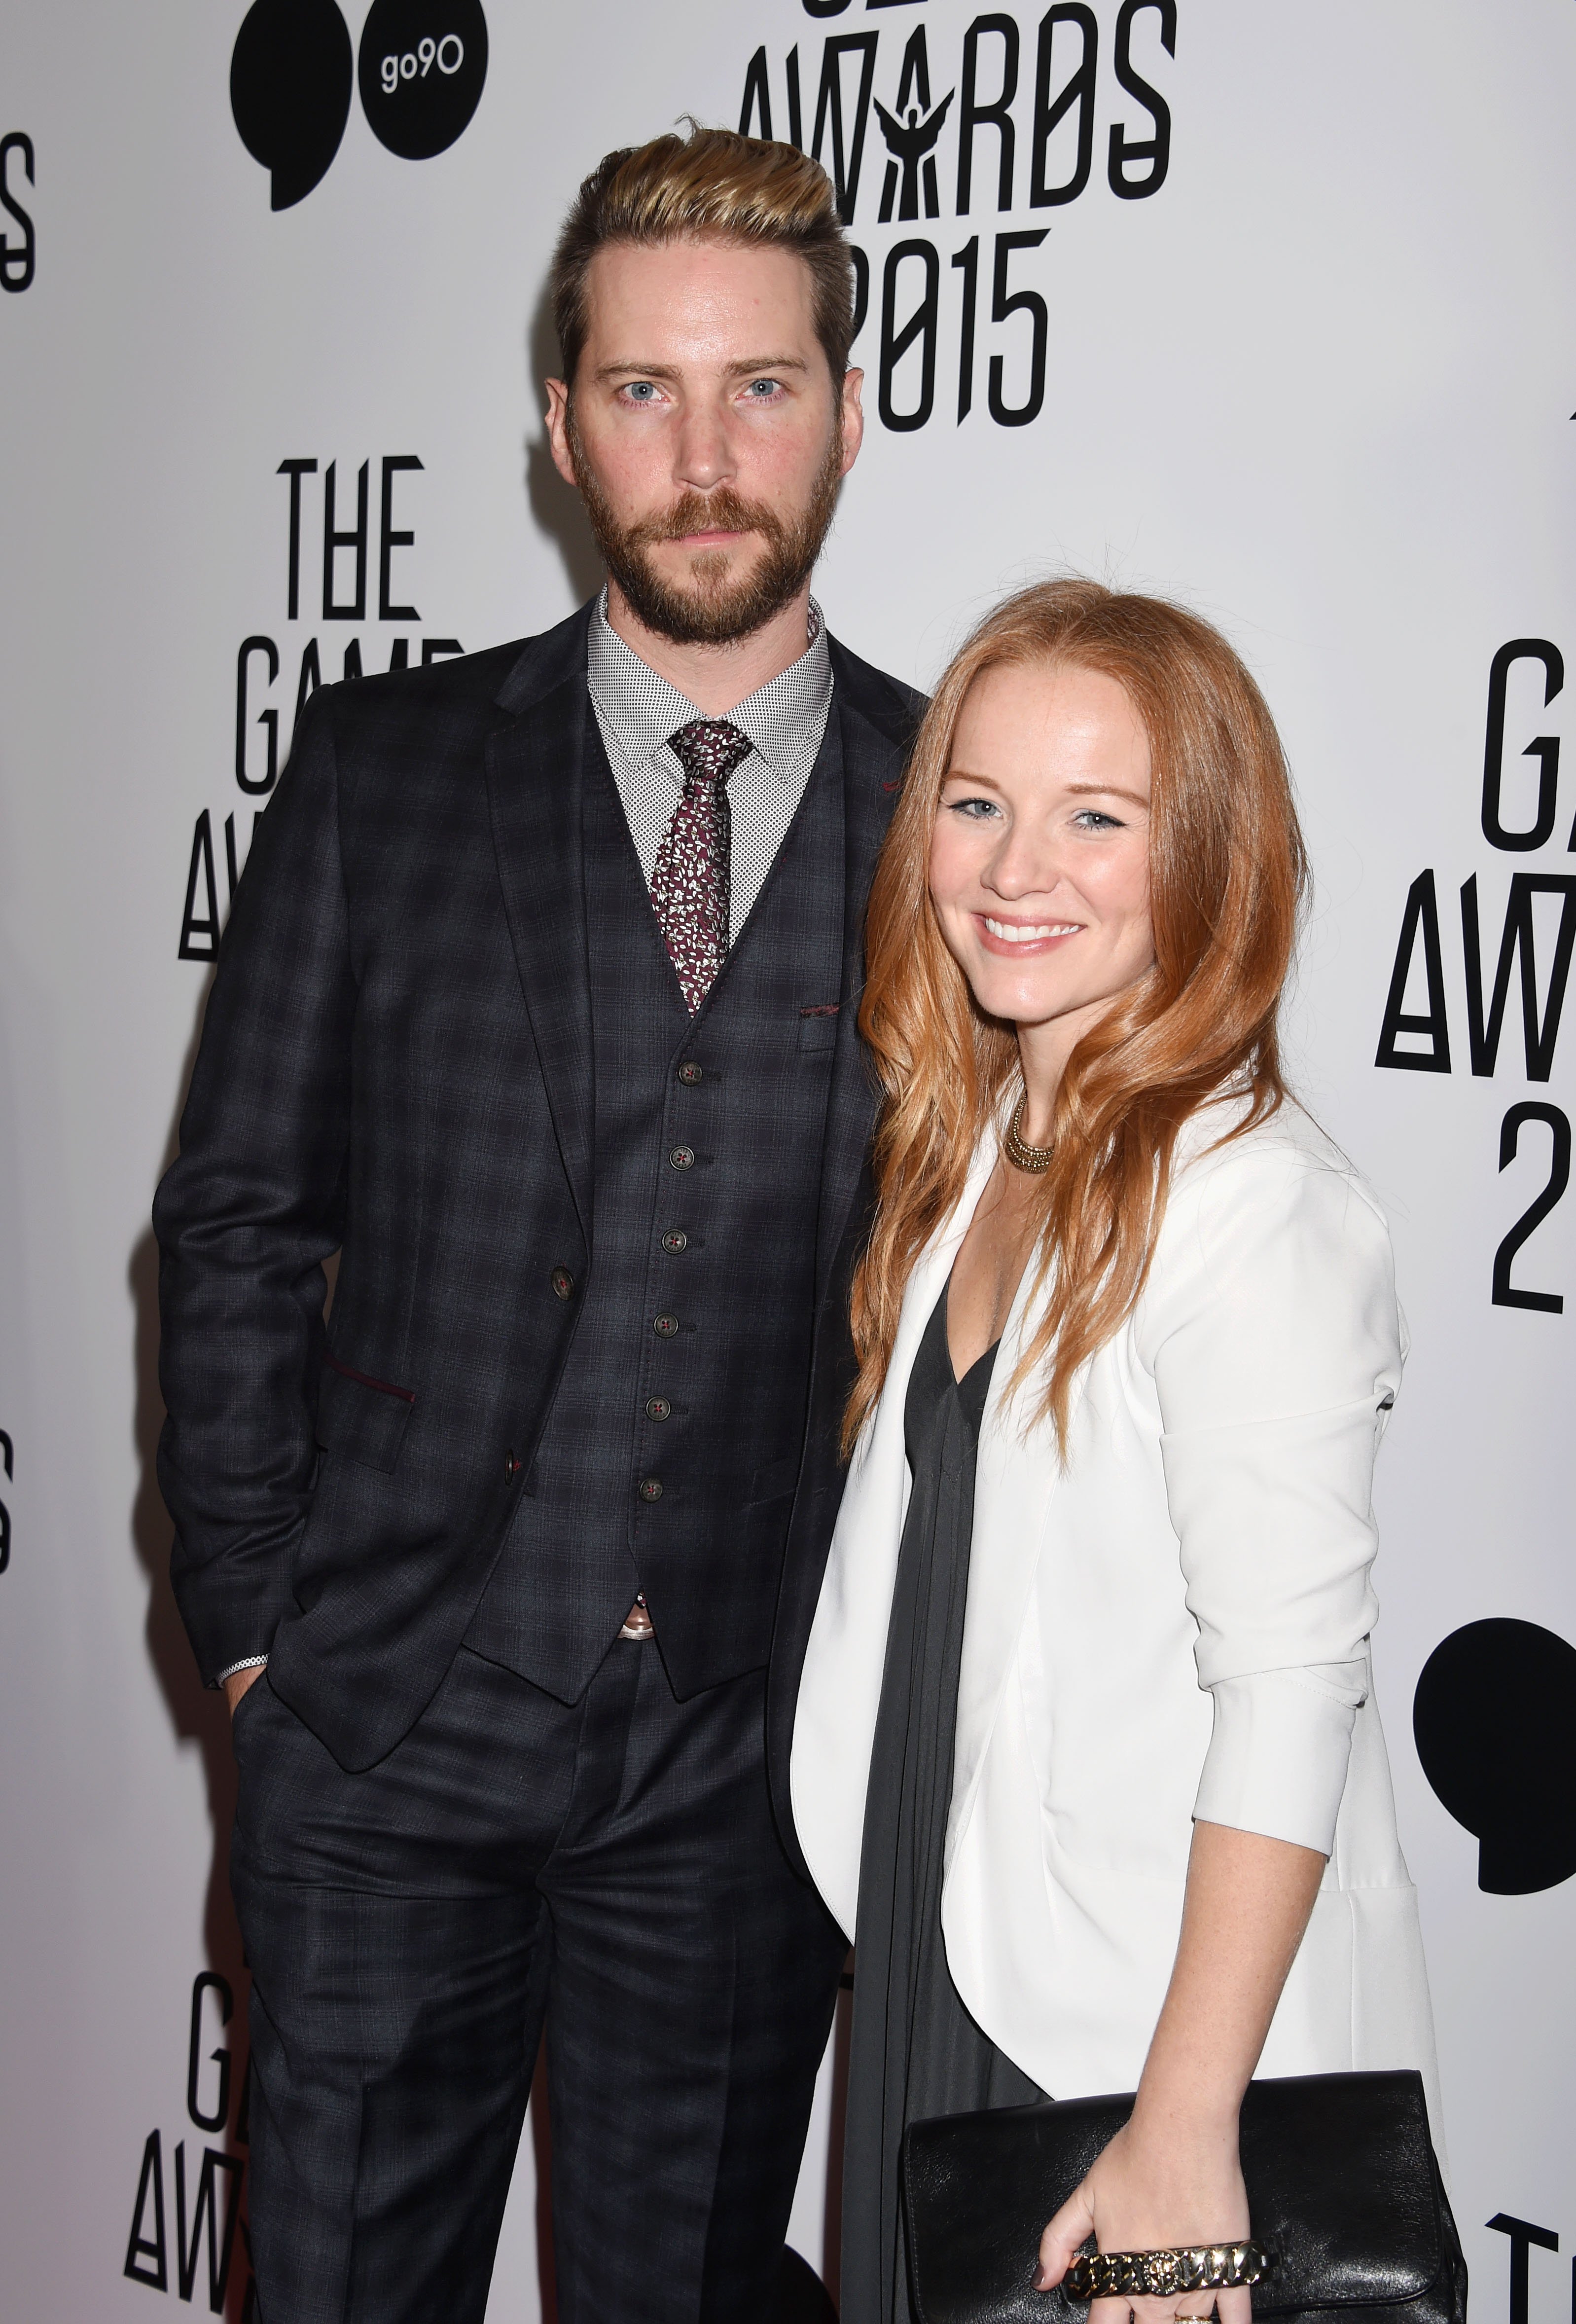 Troy Baker and Pamela Joy Walworth at The Game Awards, hosted at Microsoft Theater in Los Angeles, California, on December 3, 2015. | Source: Getty Images